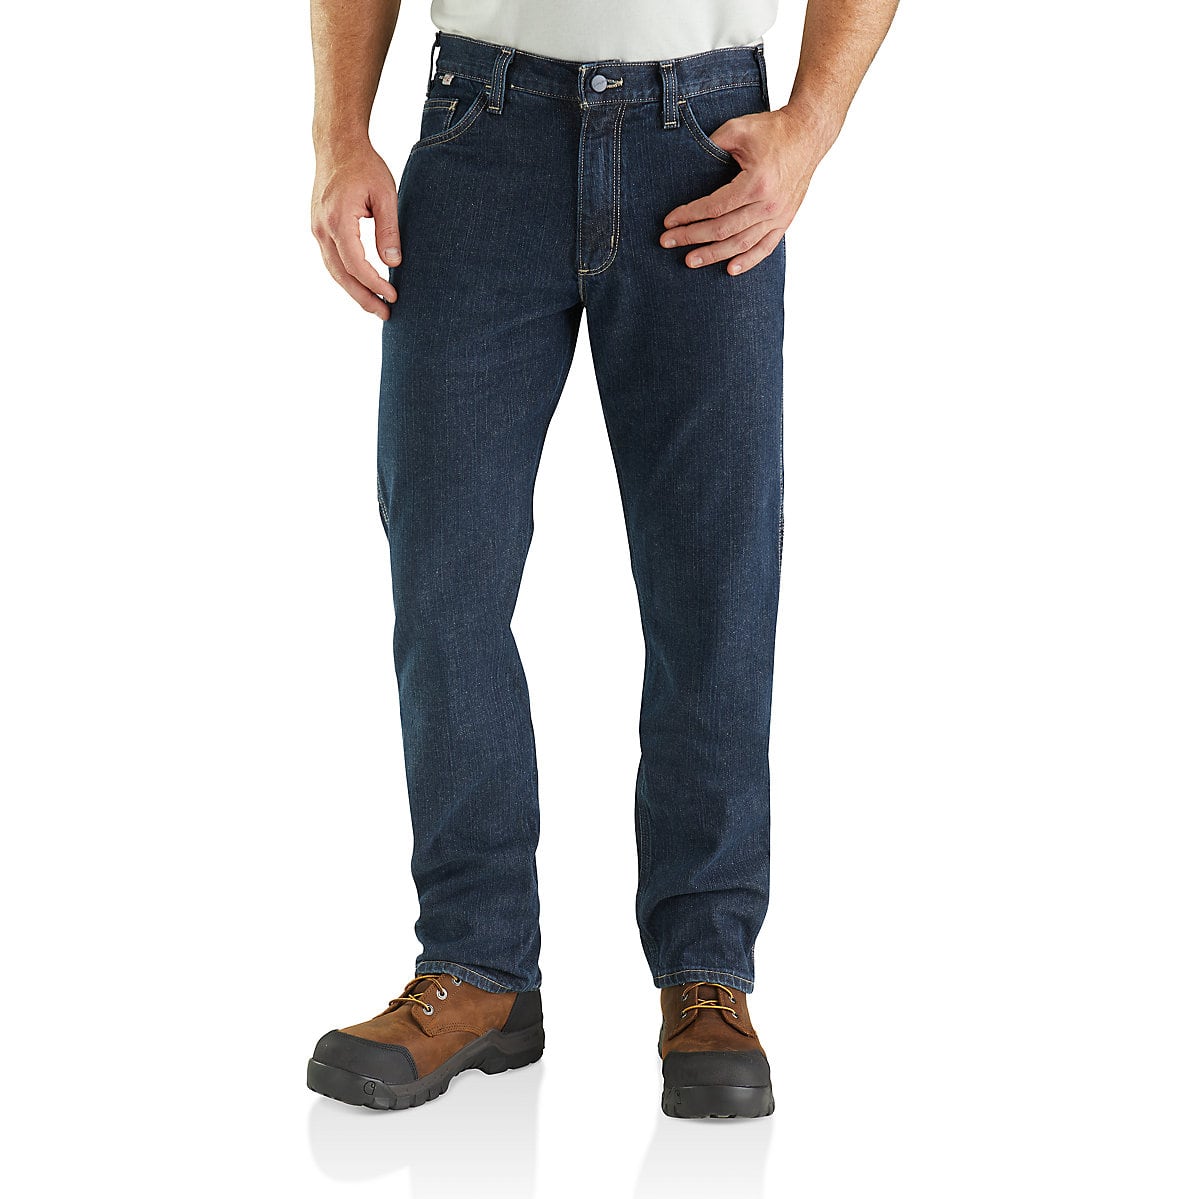 Men's Flame-resistant Rugged Flex® Jean - Relaxed Fit | Carhartt